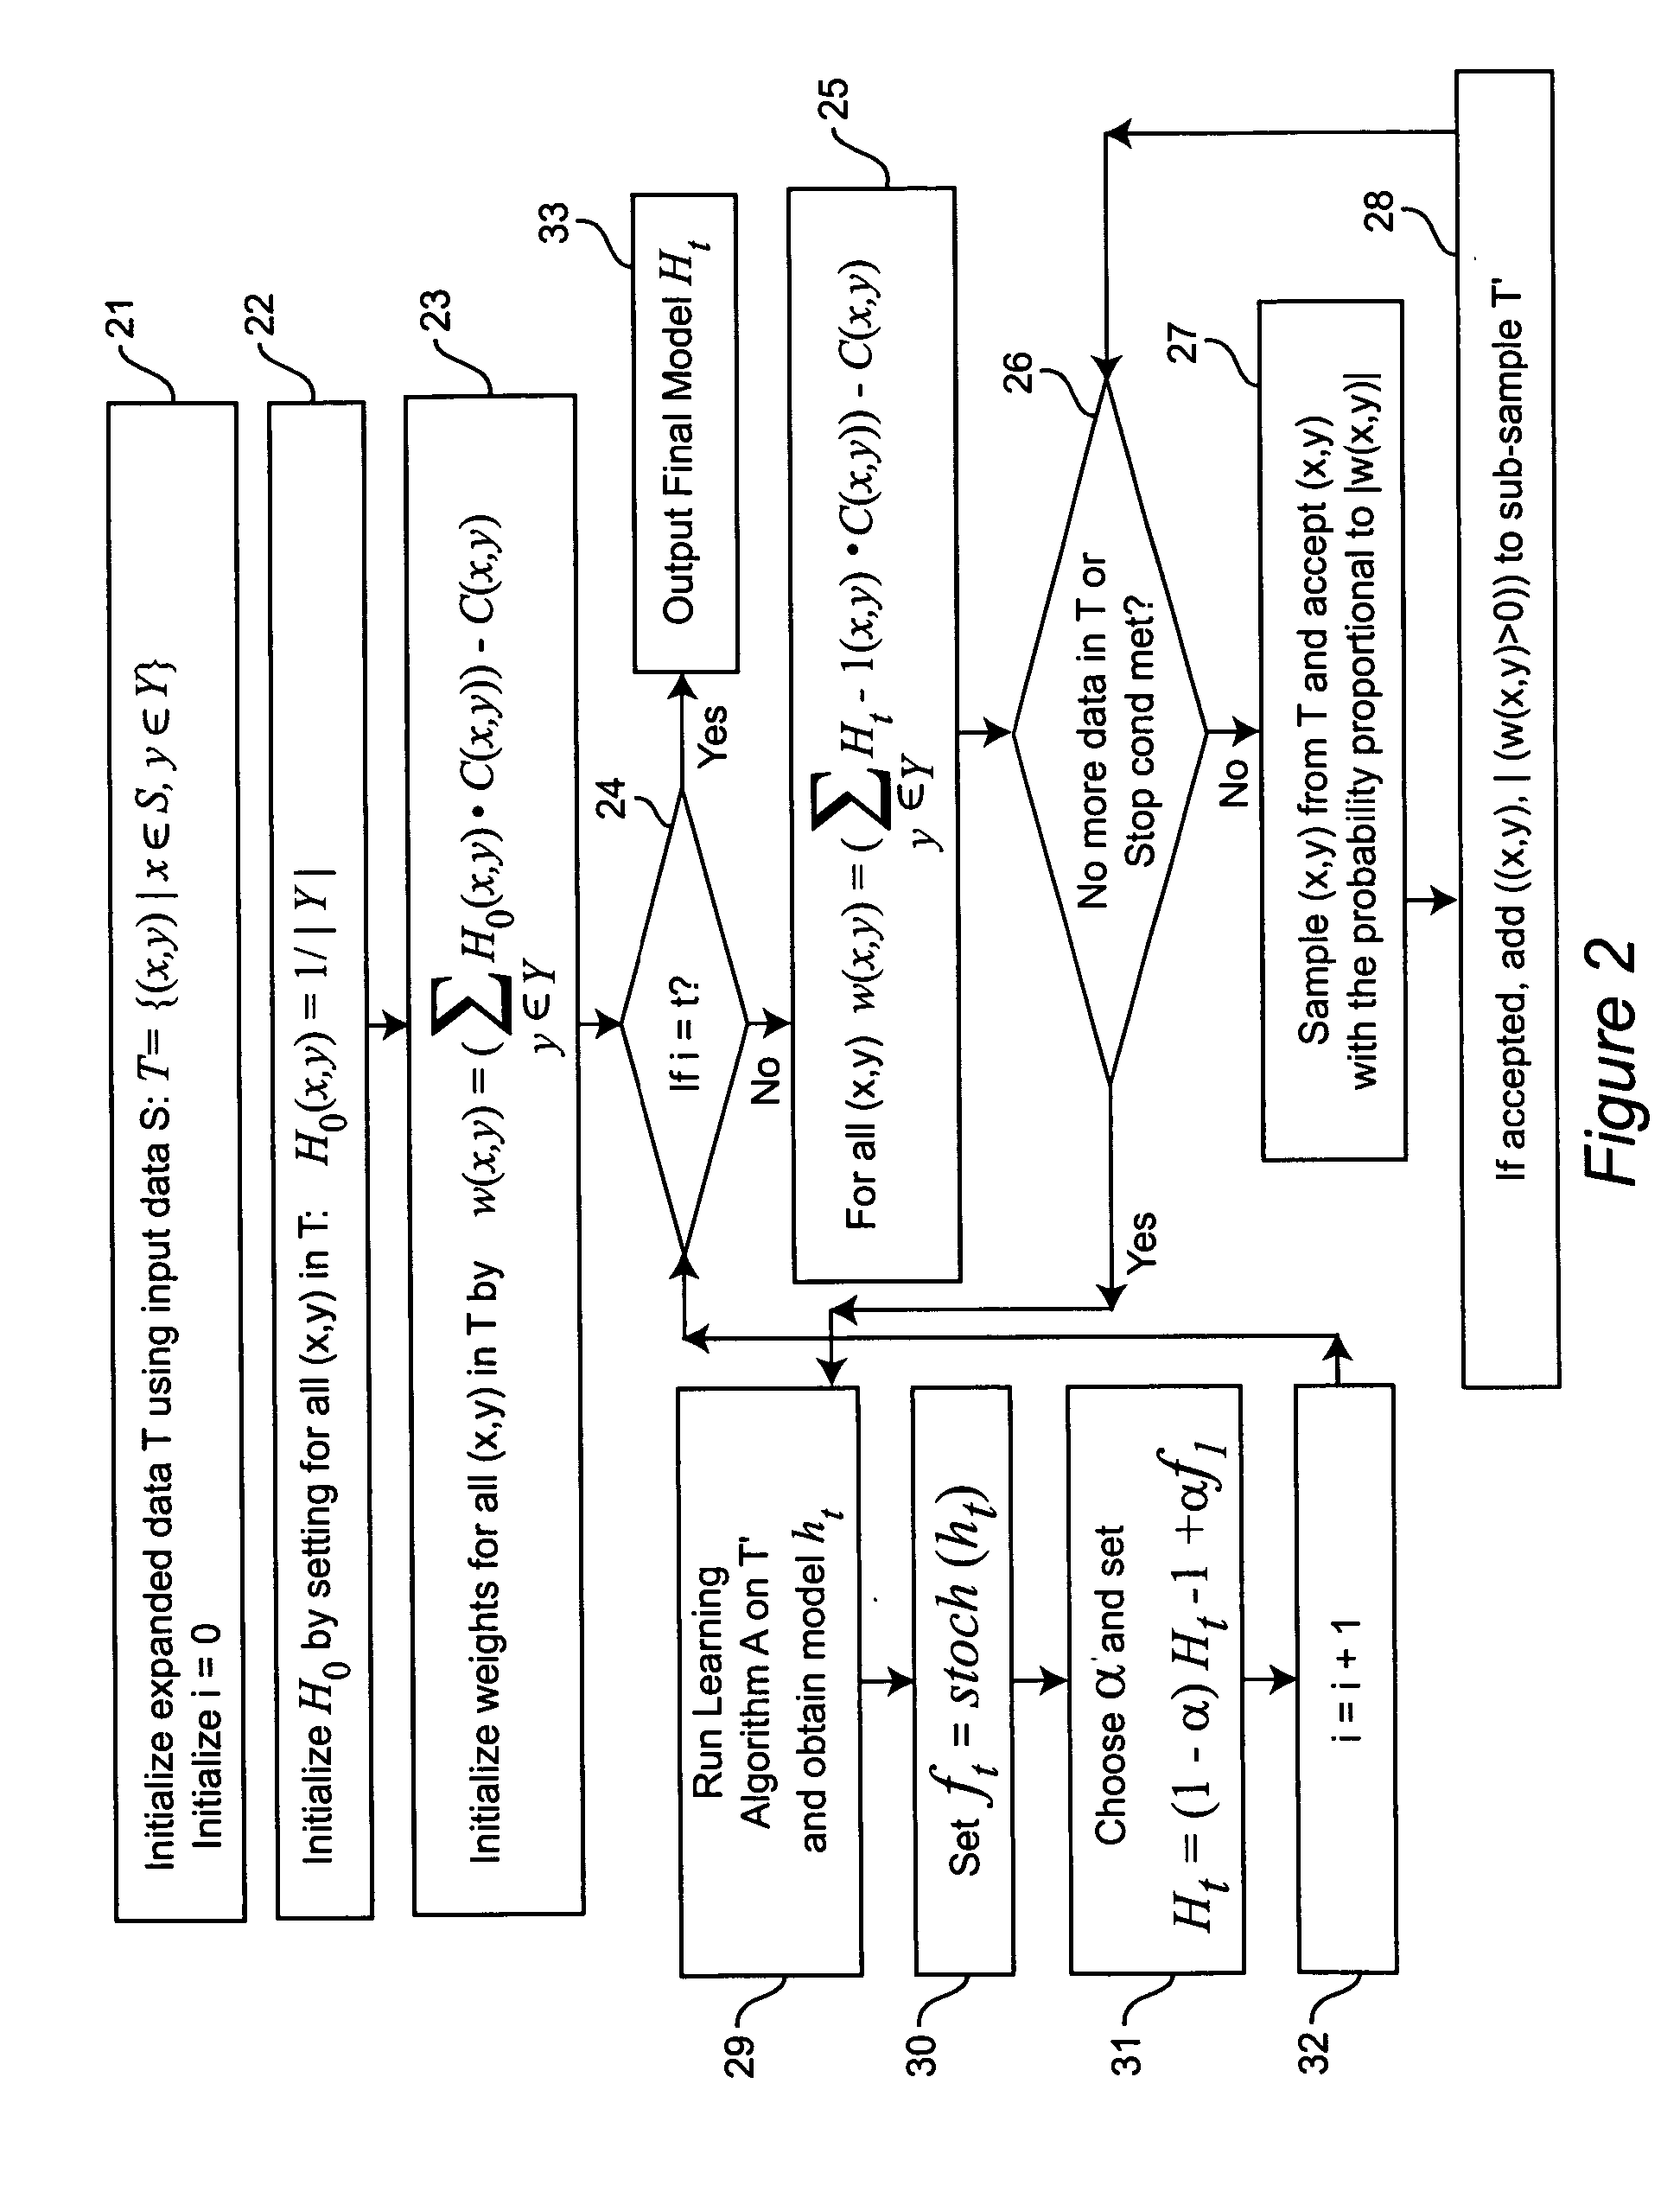 Methods for multi-class cost-sensitive learning